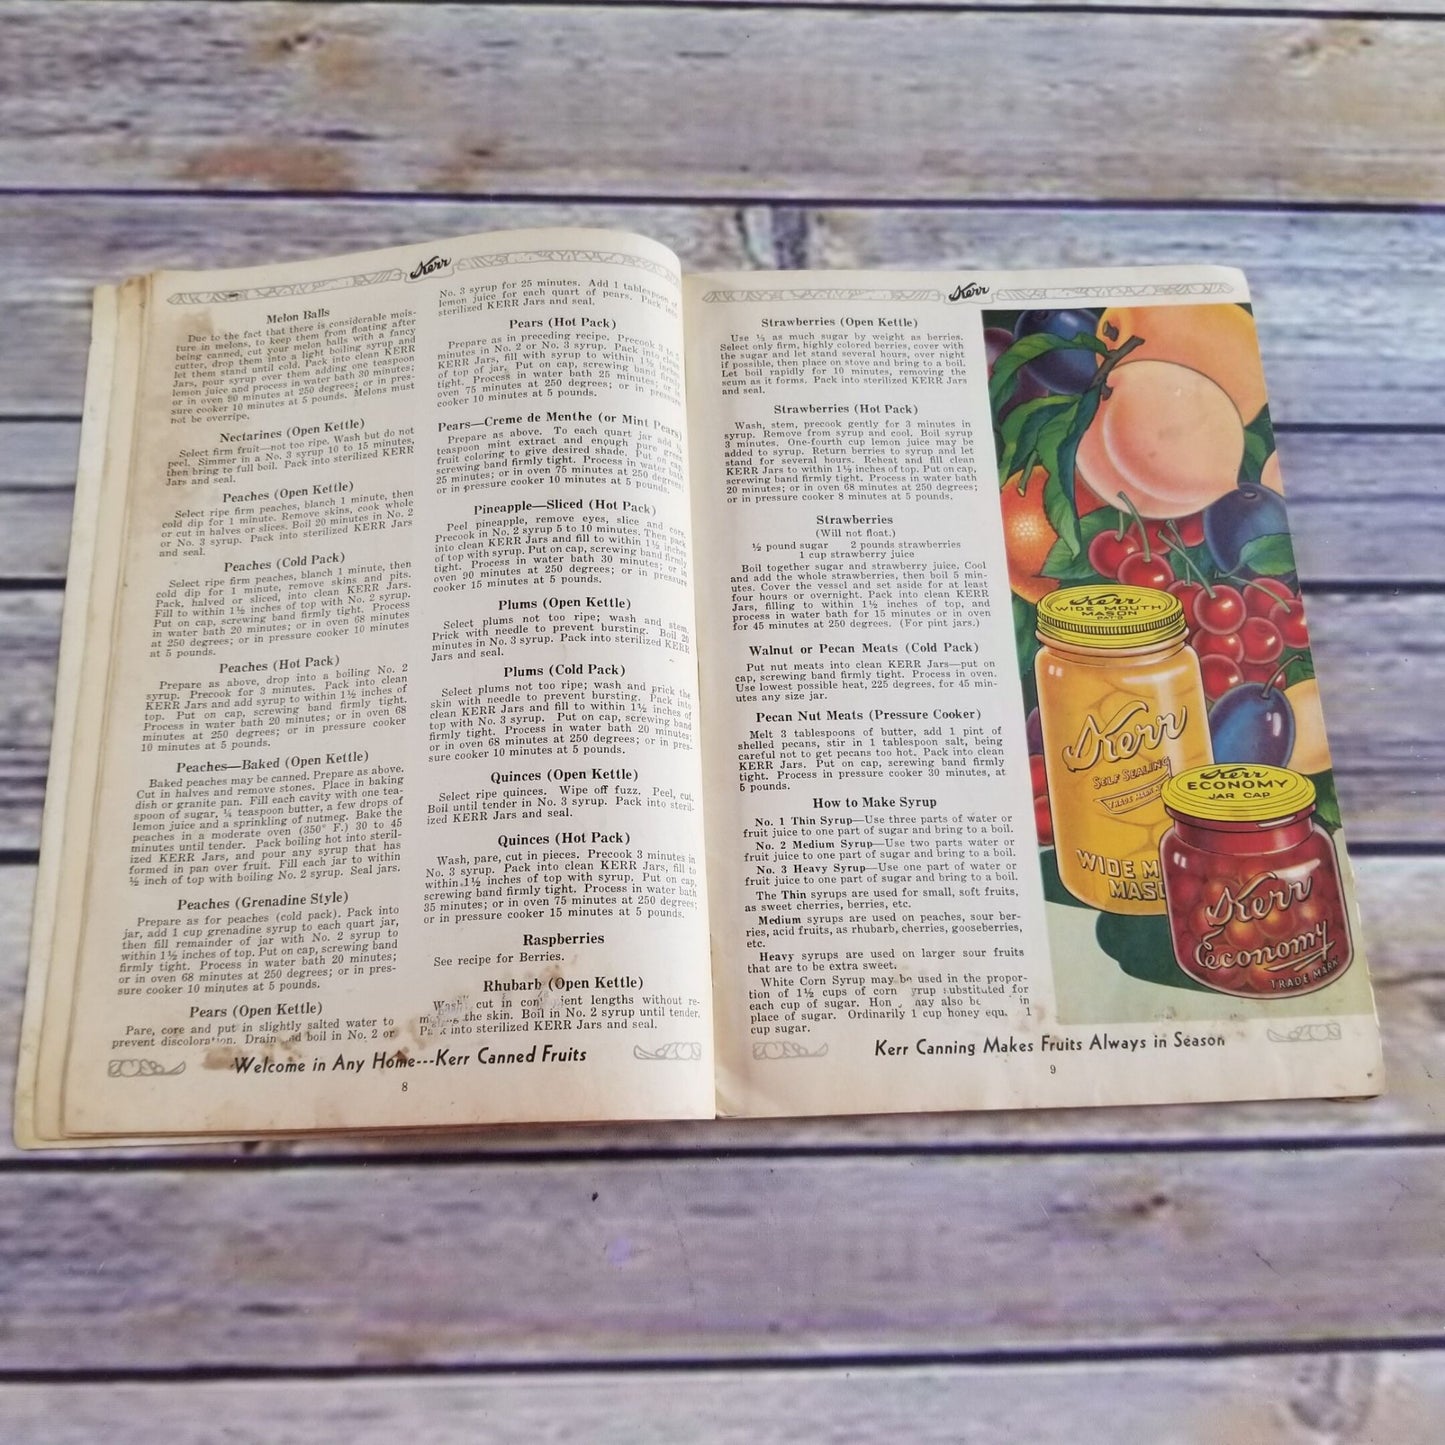 Vintage Kerr Home Canning Book Cookbook Recipes 1938 Booklet Yellow Blue Cover Canning Tips Food Preservation